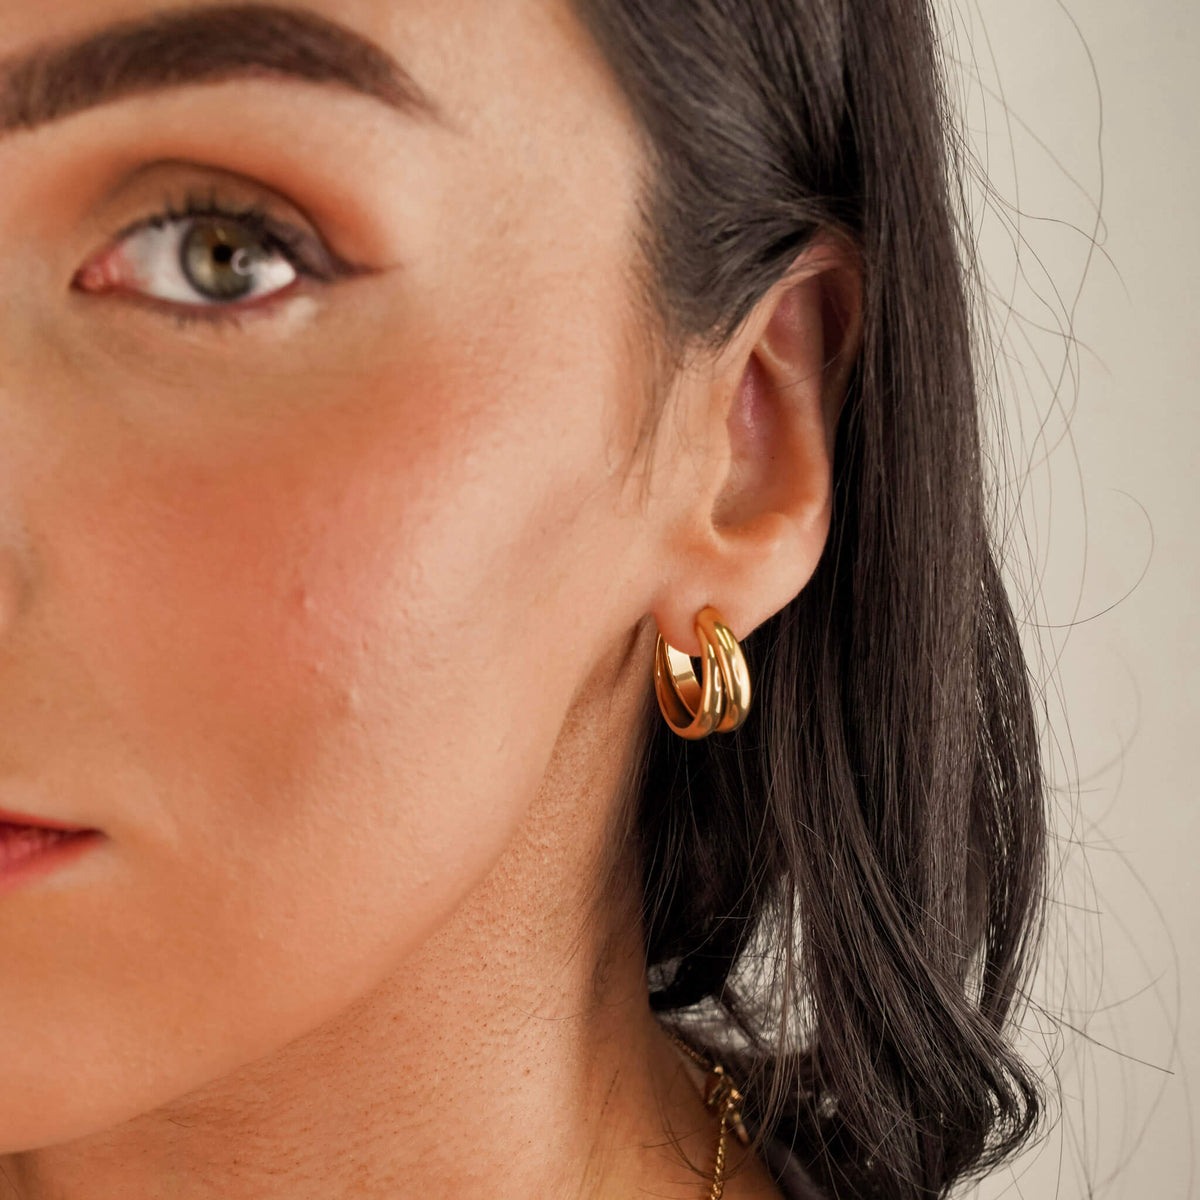 The 'Muse Hoops' from Mettle & Bloom - a pair of double band gold hoop earrings. Crafted with precision, the hoops feature a steel-plated finish for durability and a lustrous appeal. A seamless blend of timeless elegance and contemporary style, these earrings offer a versatile accessory to elevate your look. Available now at Mettle & Bloom, the Muse Hoops embody modern sophistication with their exquisite design.